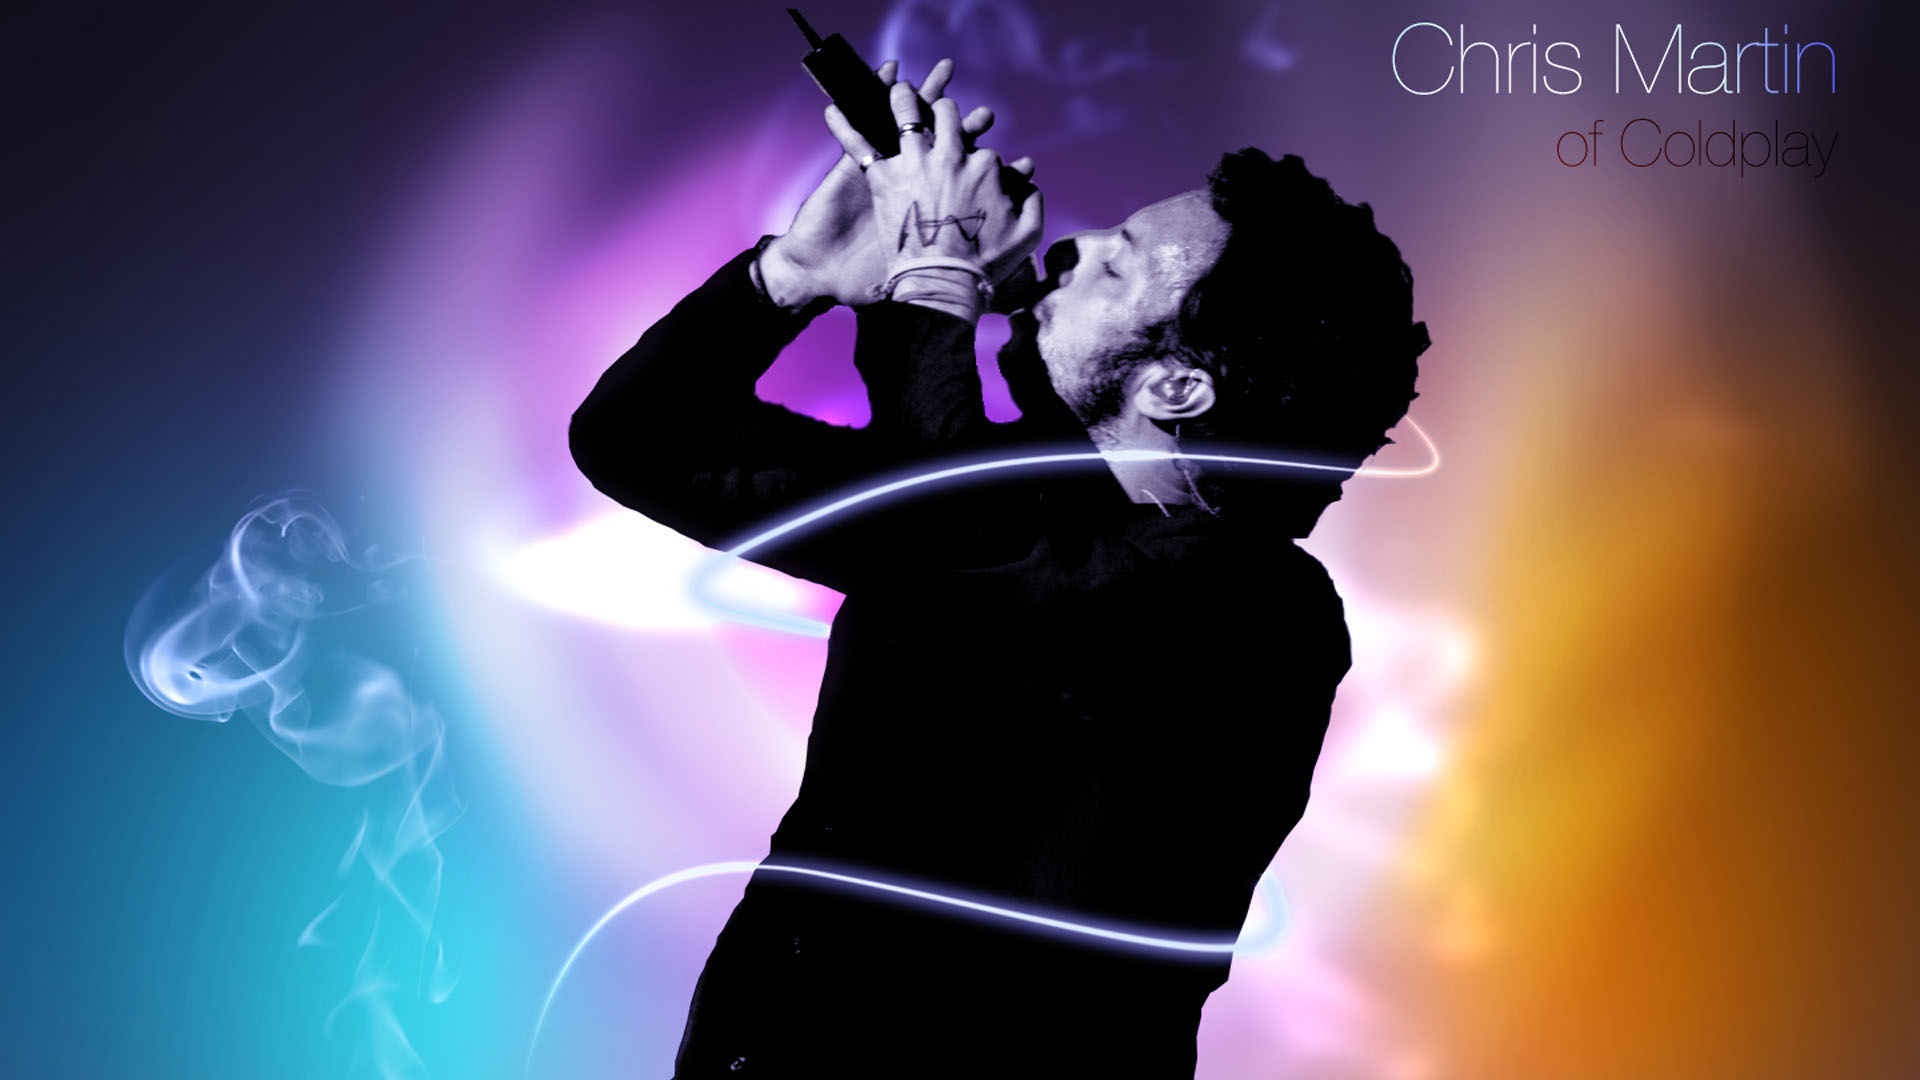 Chris Martin Coldplay 1920x1080 Wallpapers, 1920x1080 Wallpapers ...